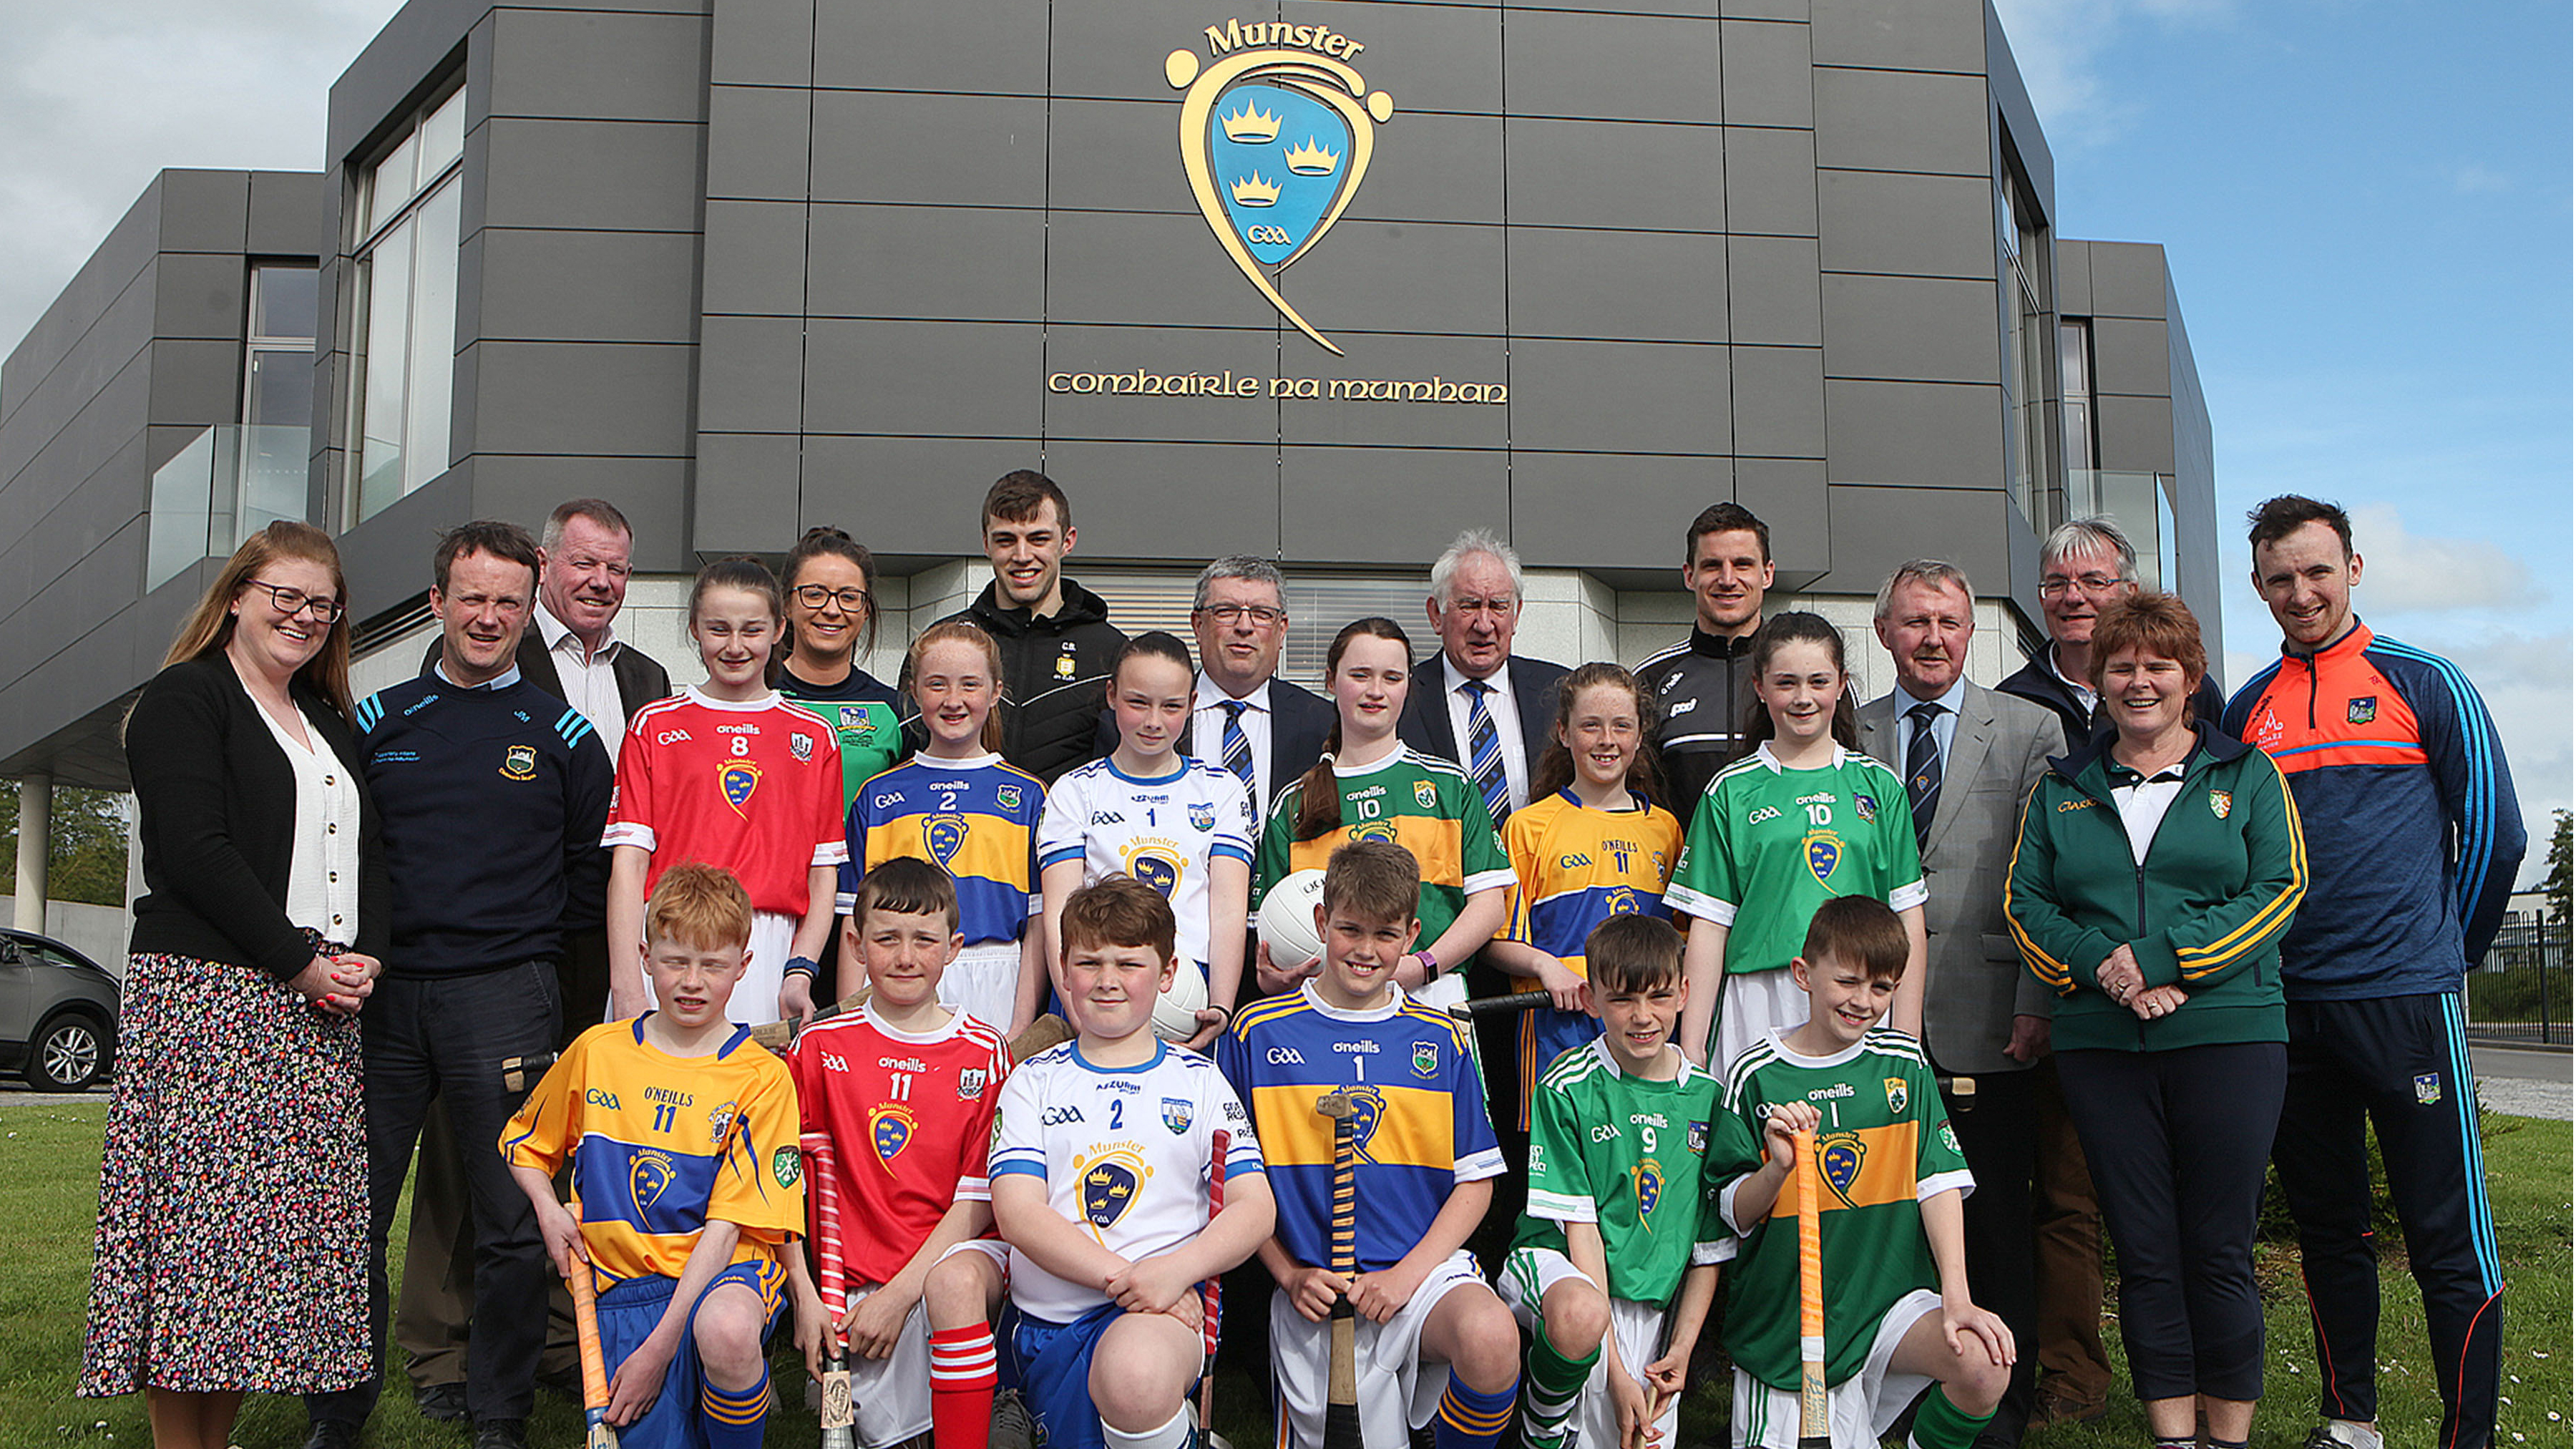 Dreams Come True in the Munster GAA Primary Game